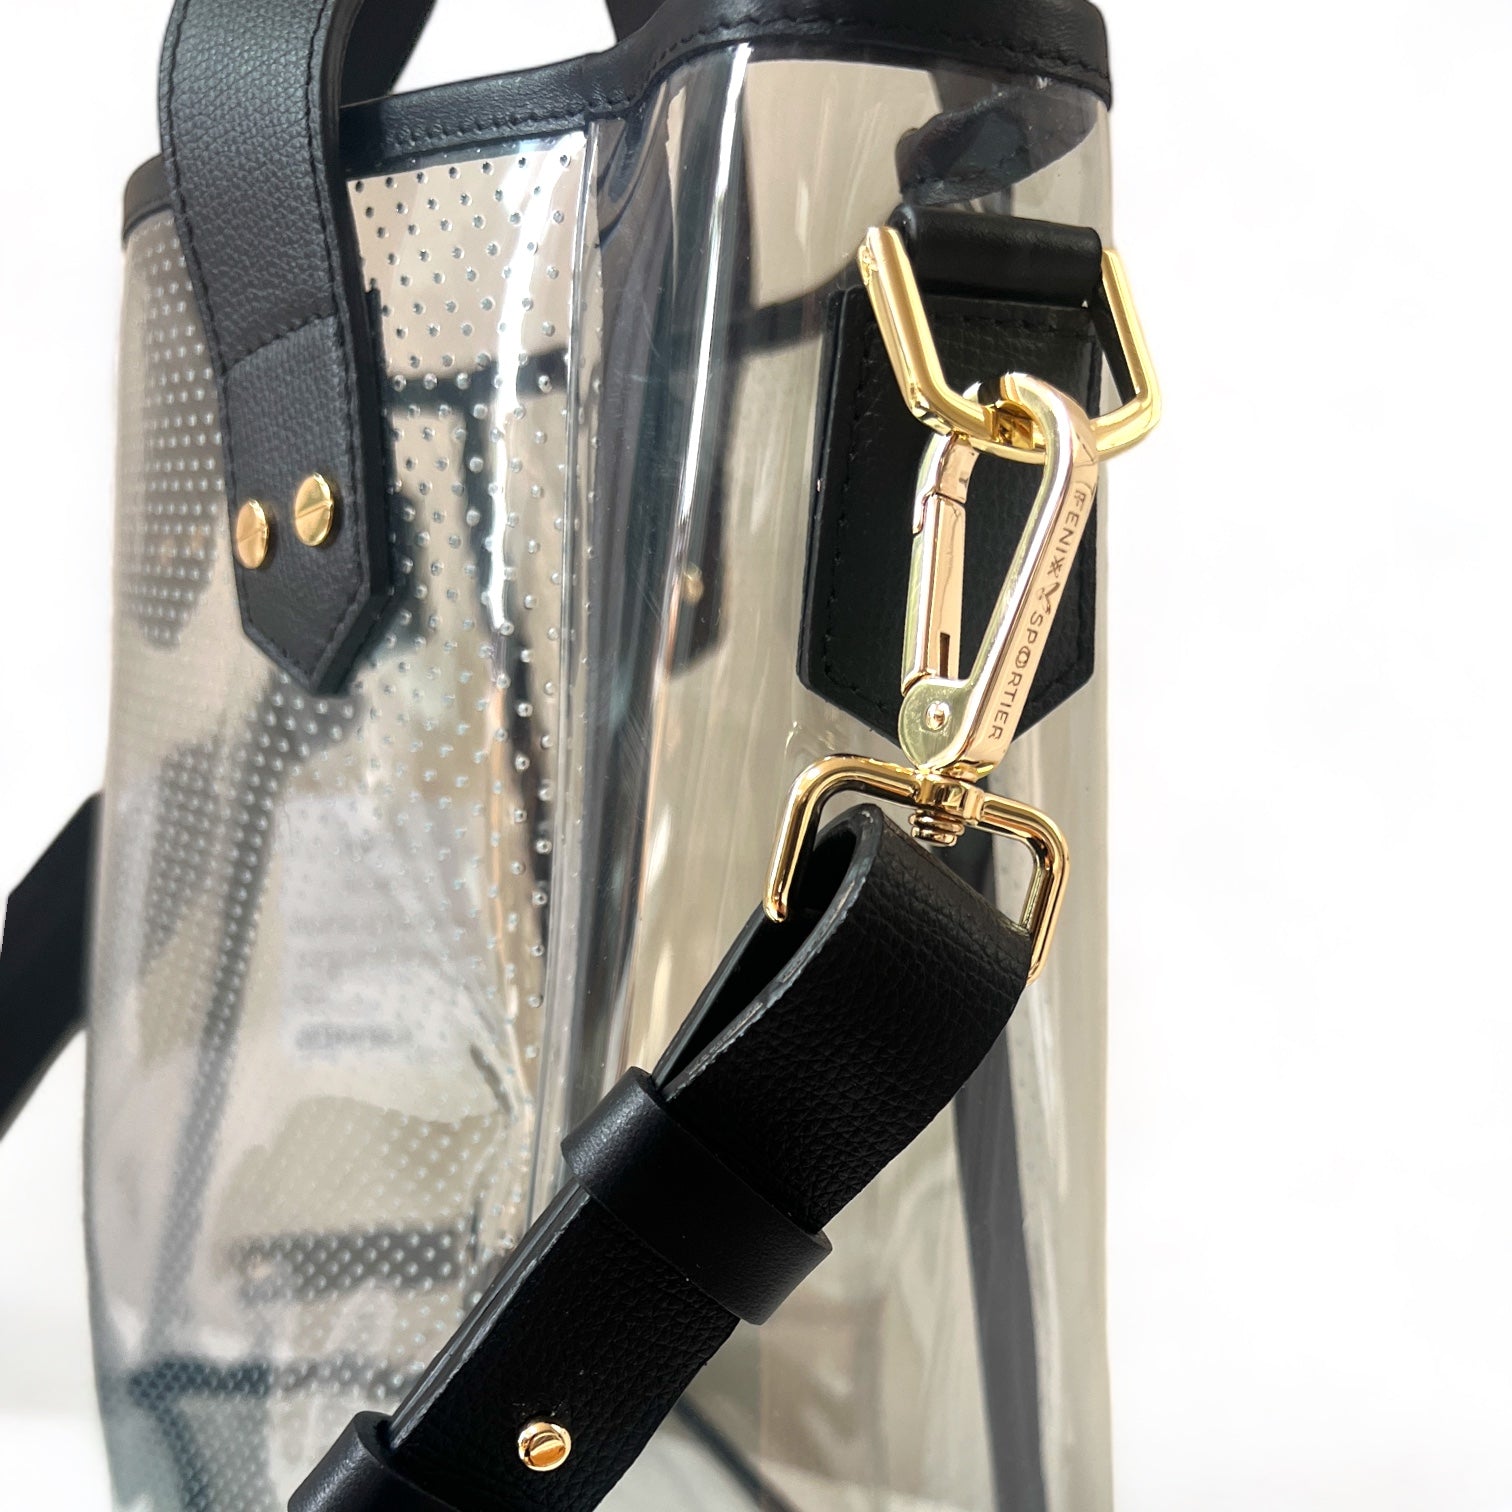 Gameday Bag - Black Leather / Gold Hardware / Clear PVC